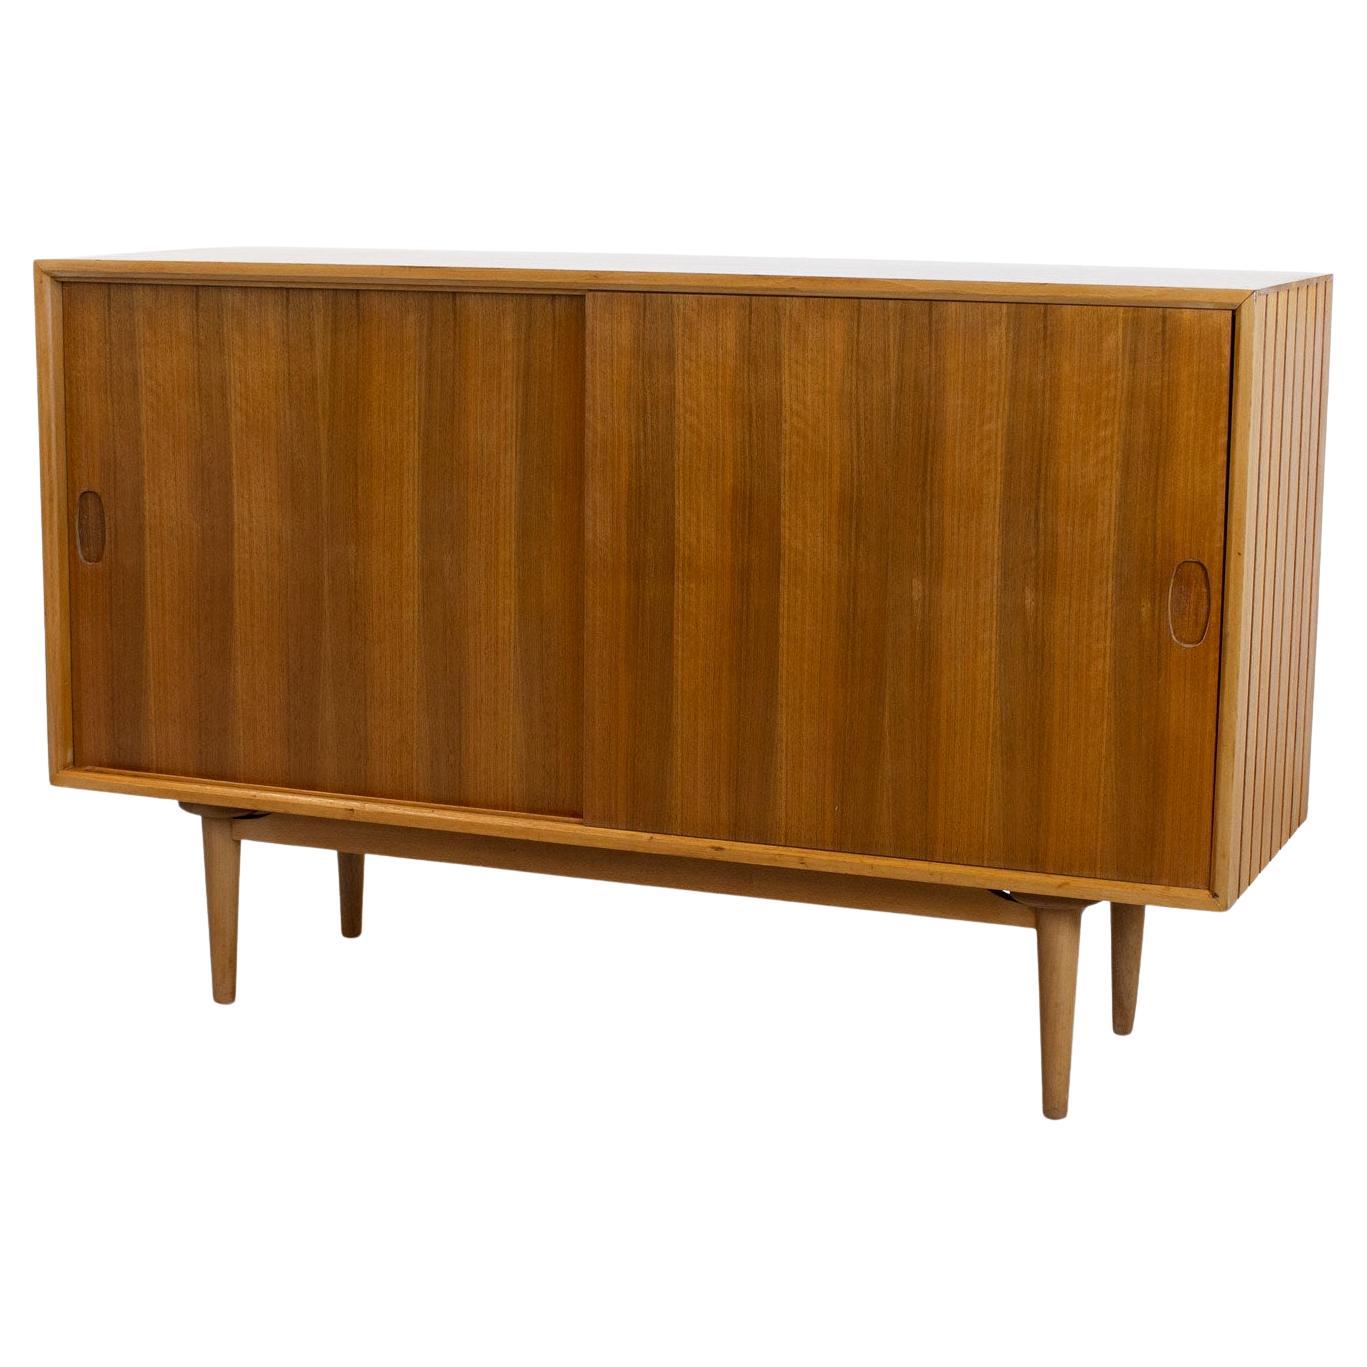 English Mid-Century Walnut Sideboard by Heals, 1960s For Sale